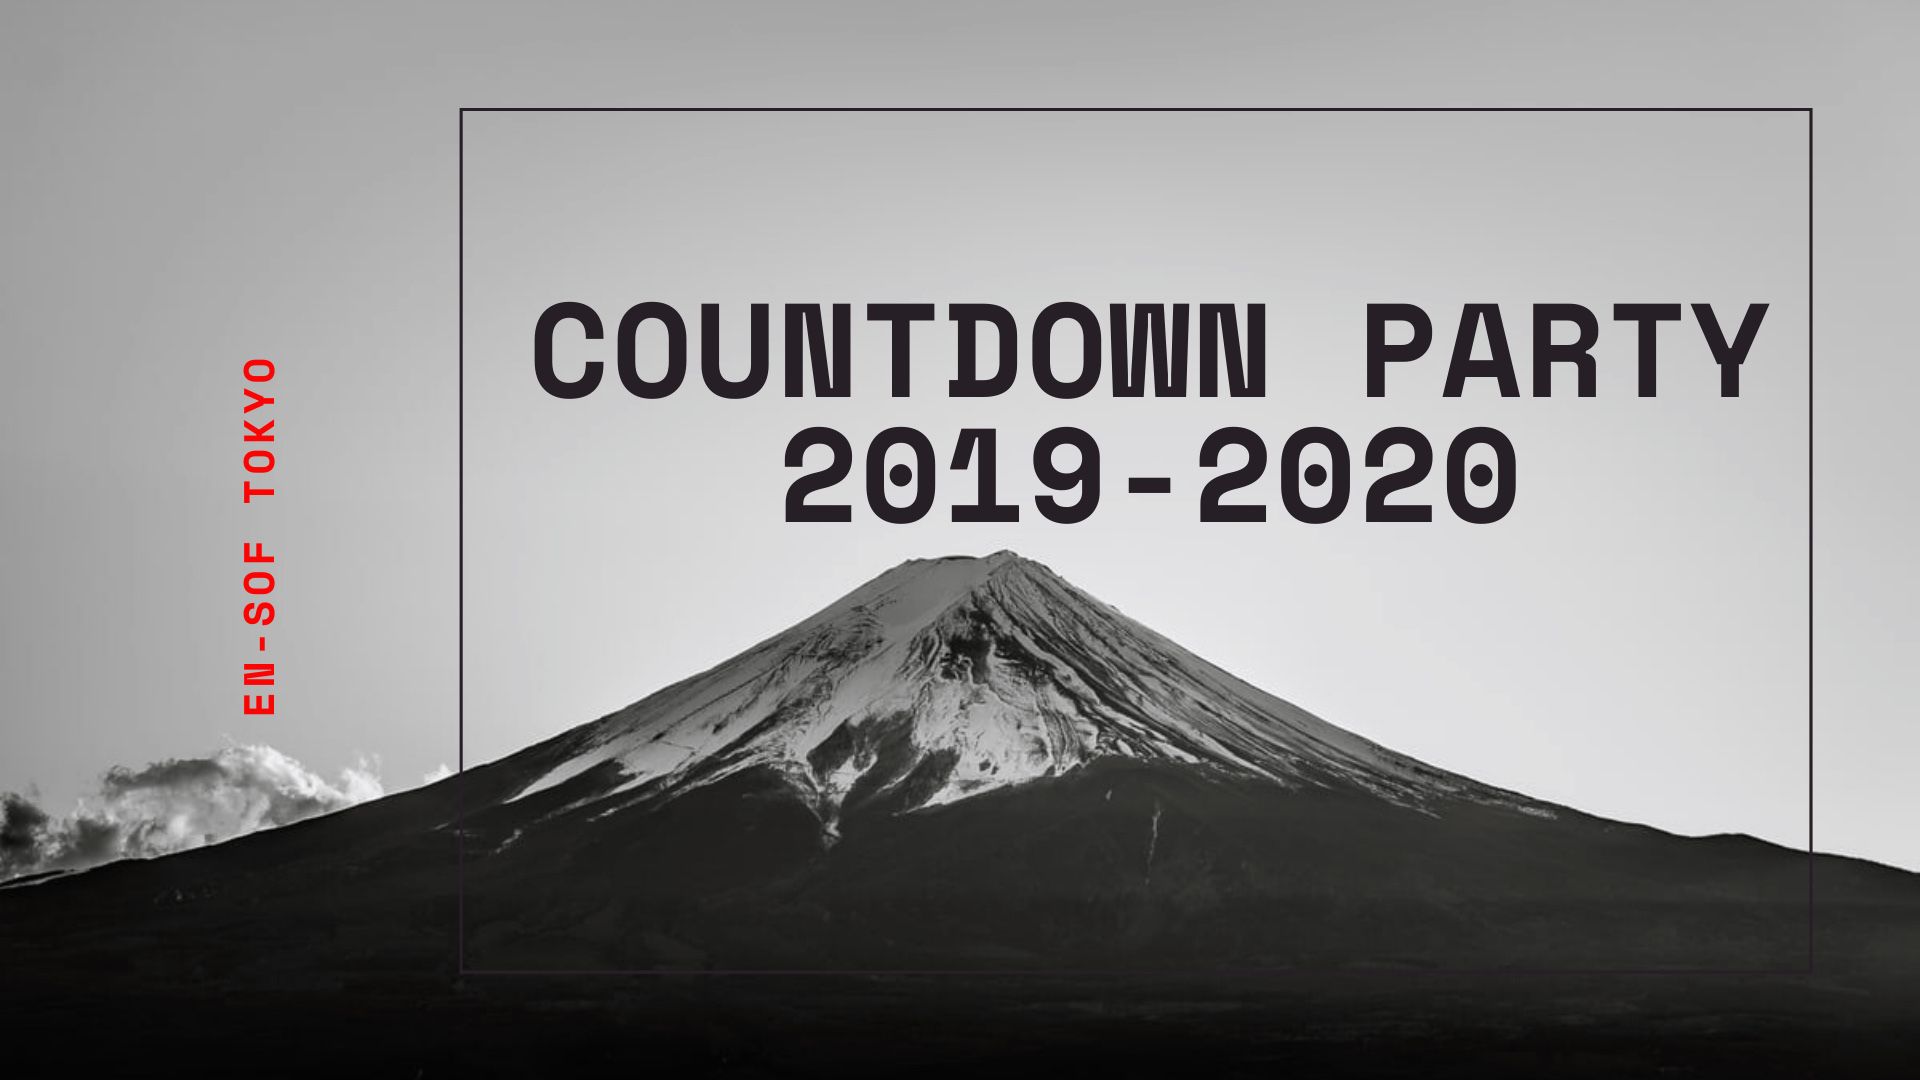 COUNTDOWN PARTY 2019-2020